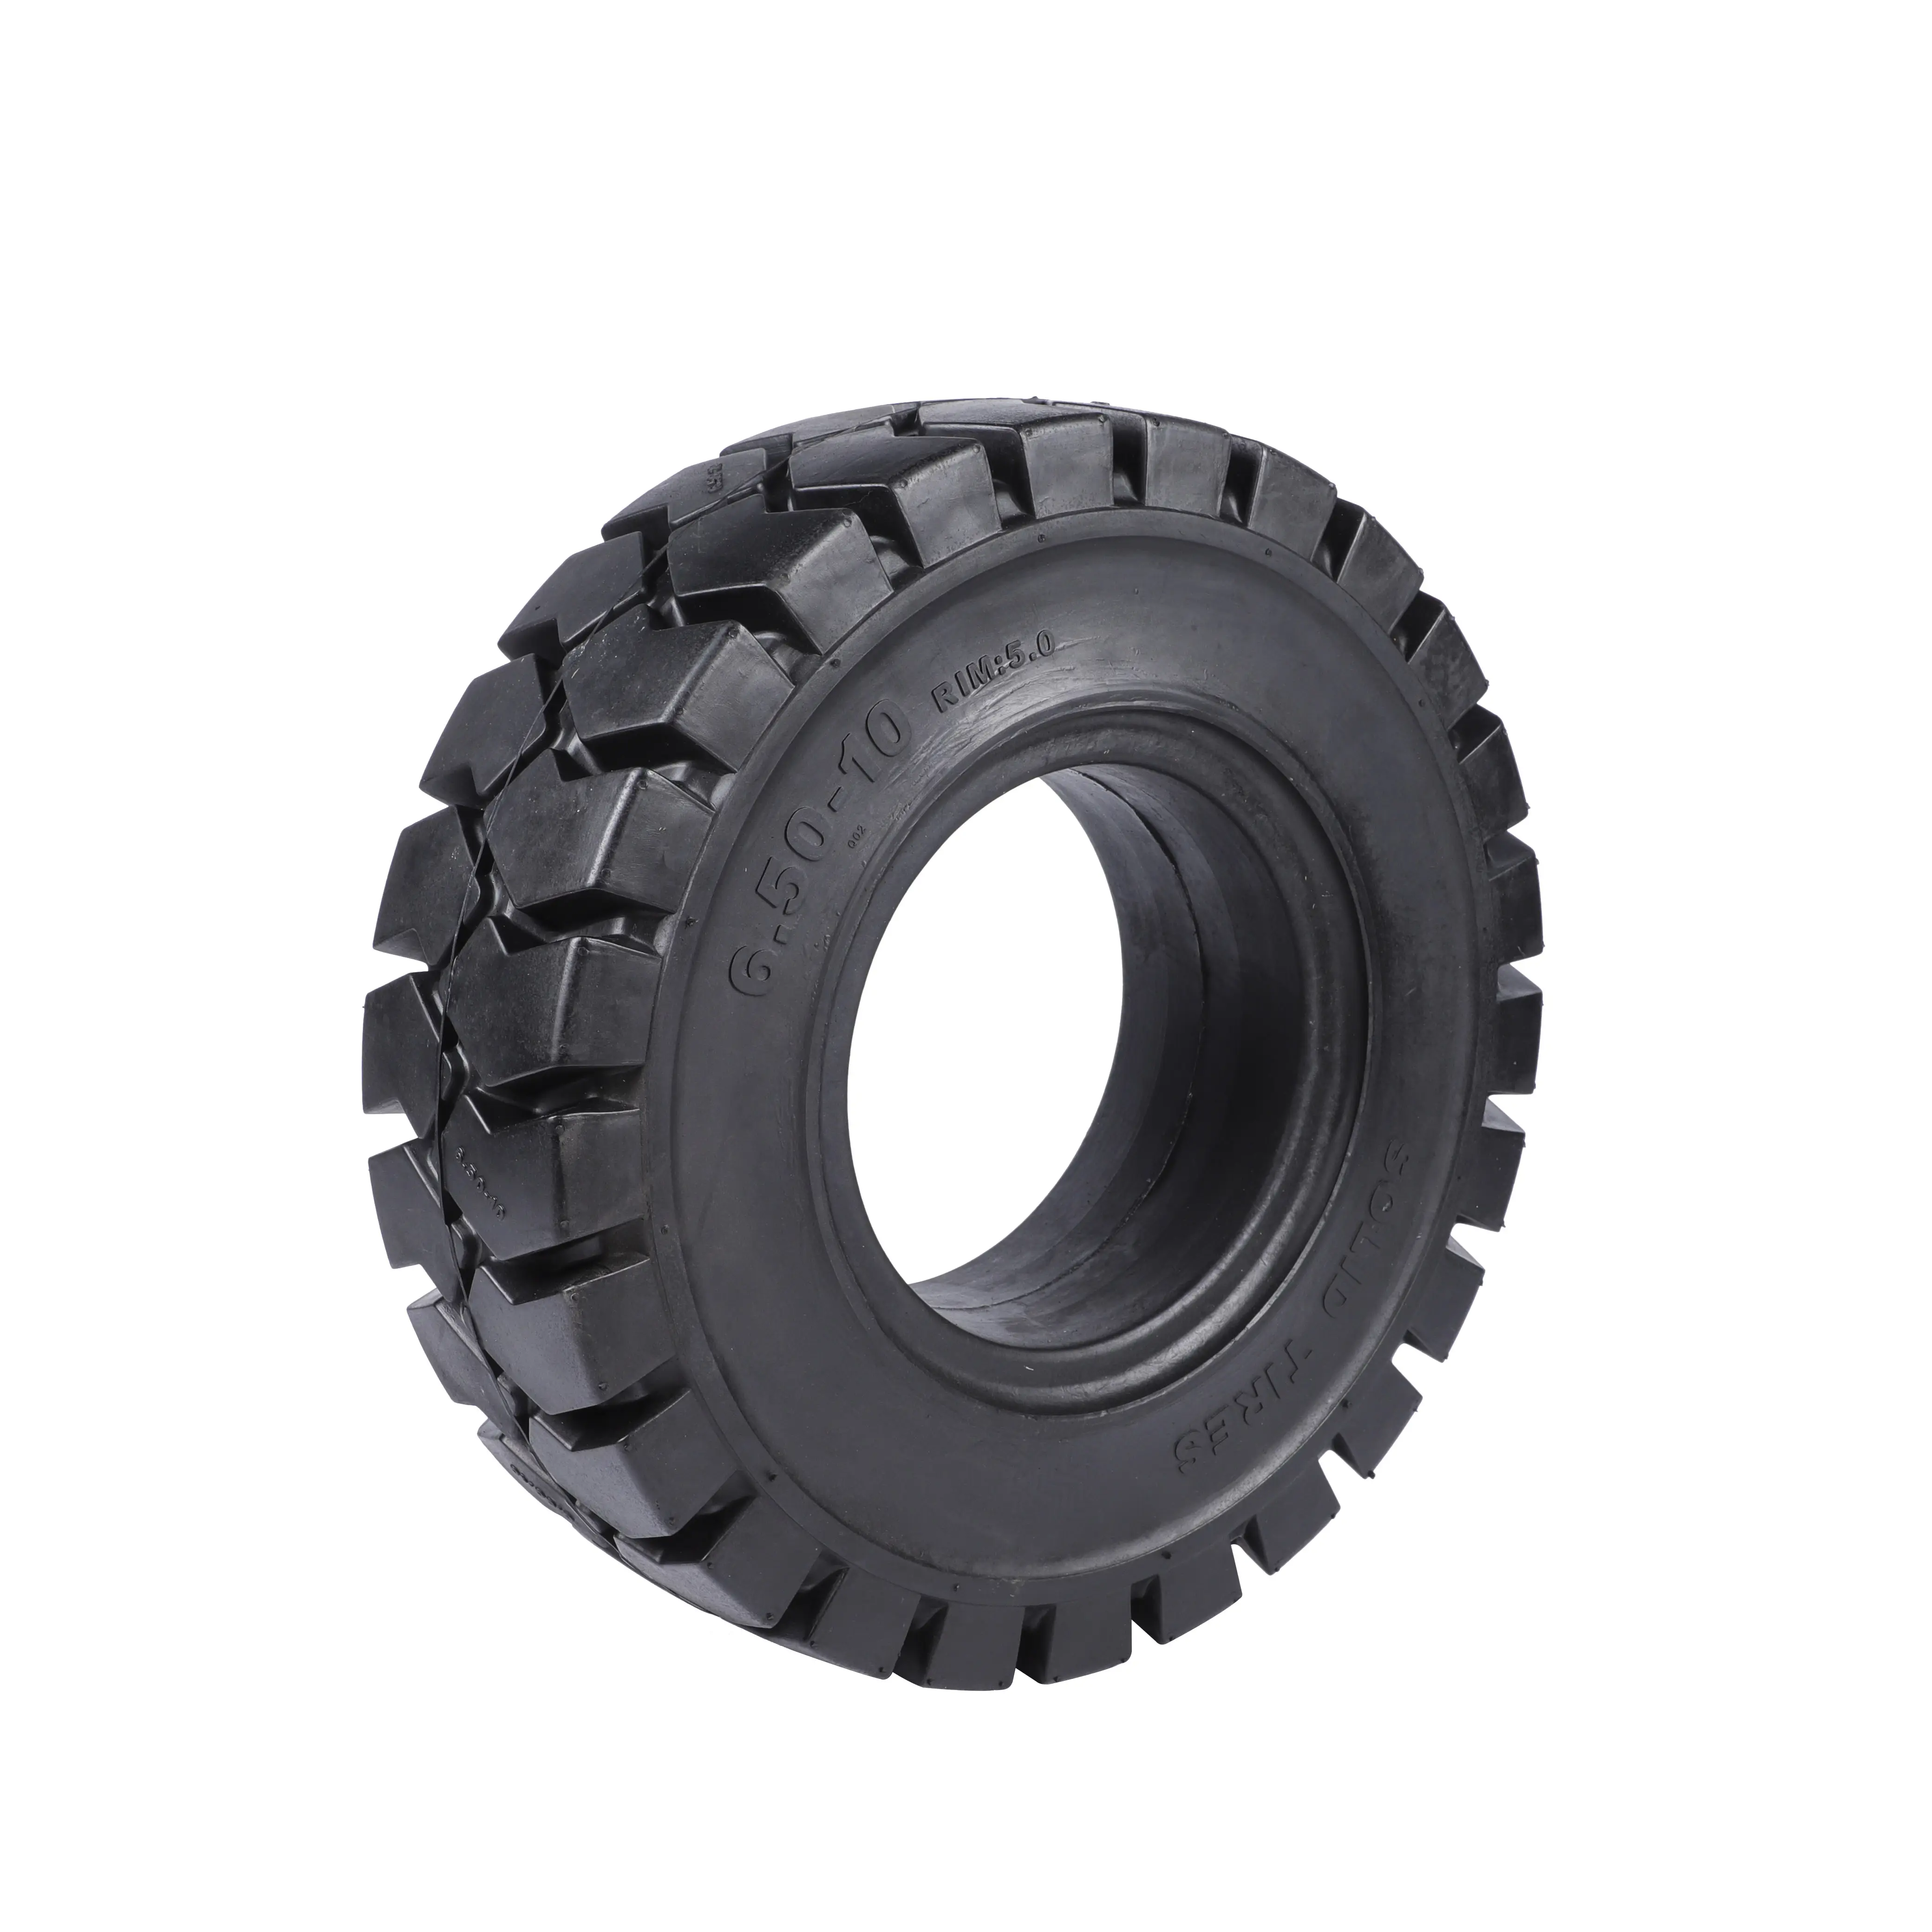 No Mark Available Forklift Solid Tyre A6.50-10 Manufacturer Solid Tyre Supplier Solid Tyre Of Different Sizes